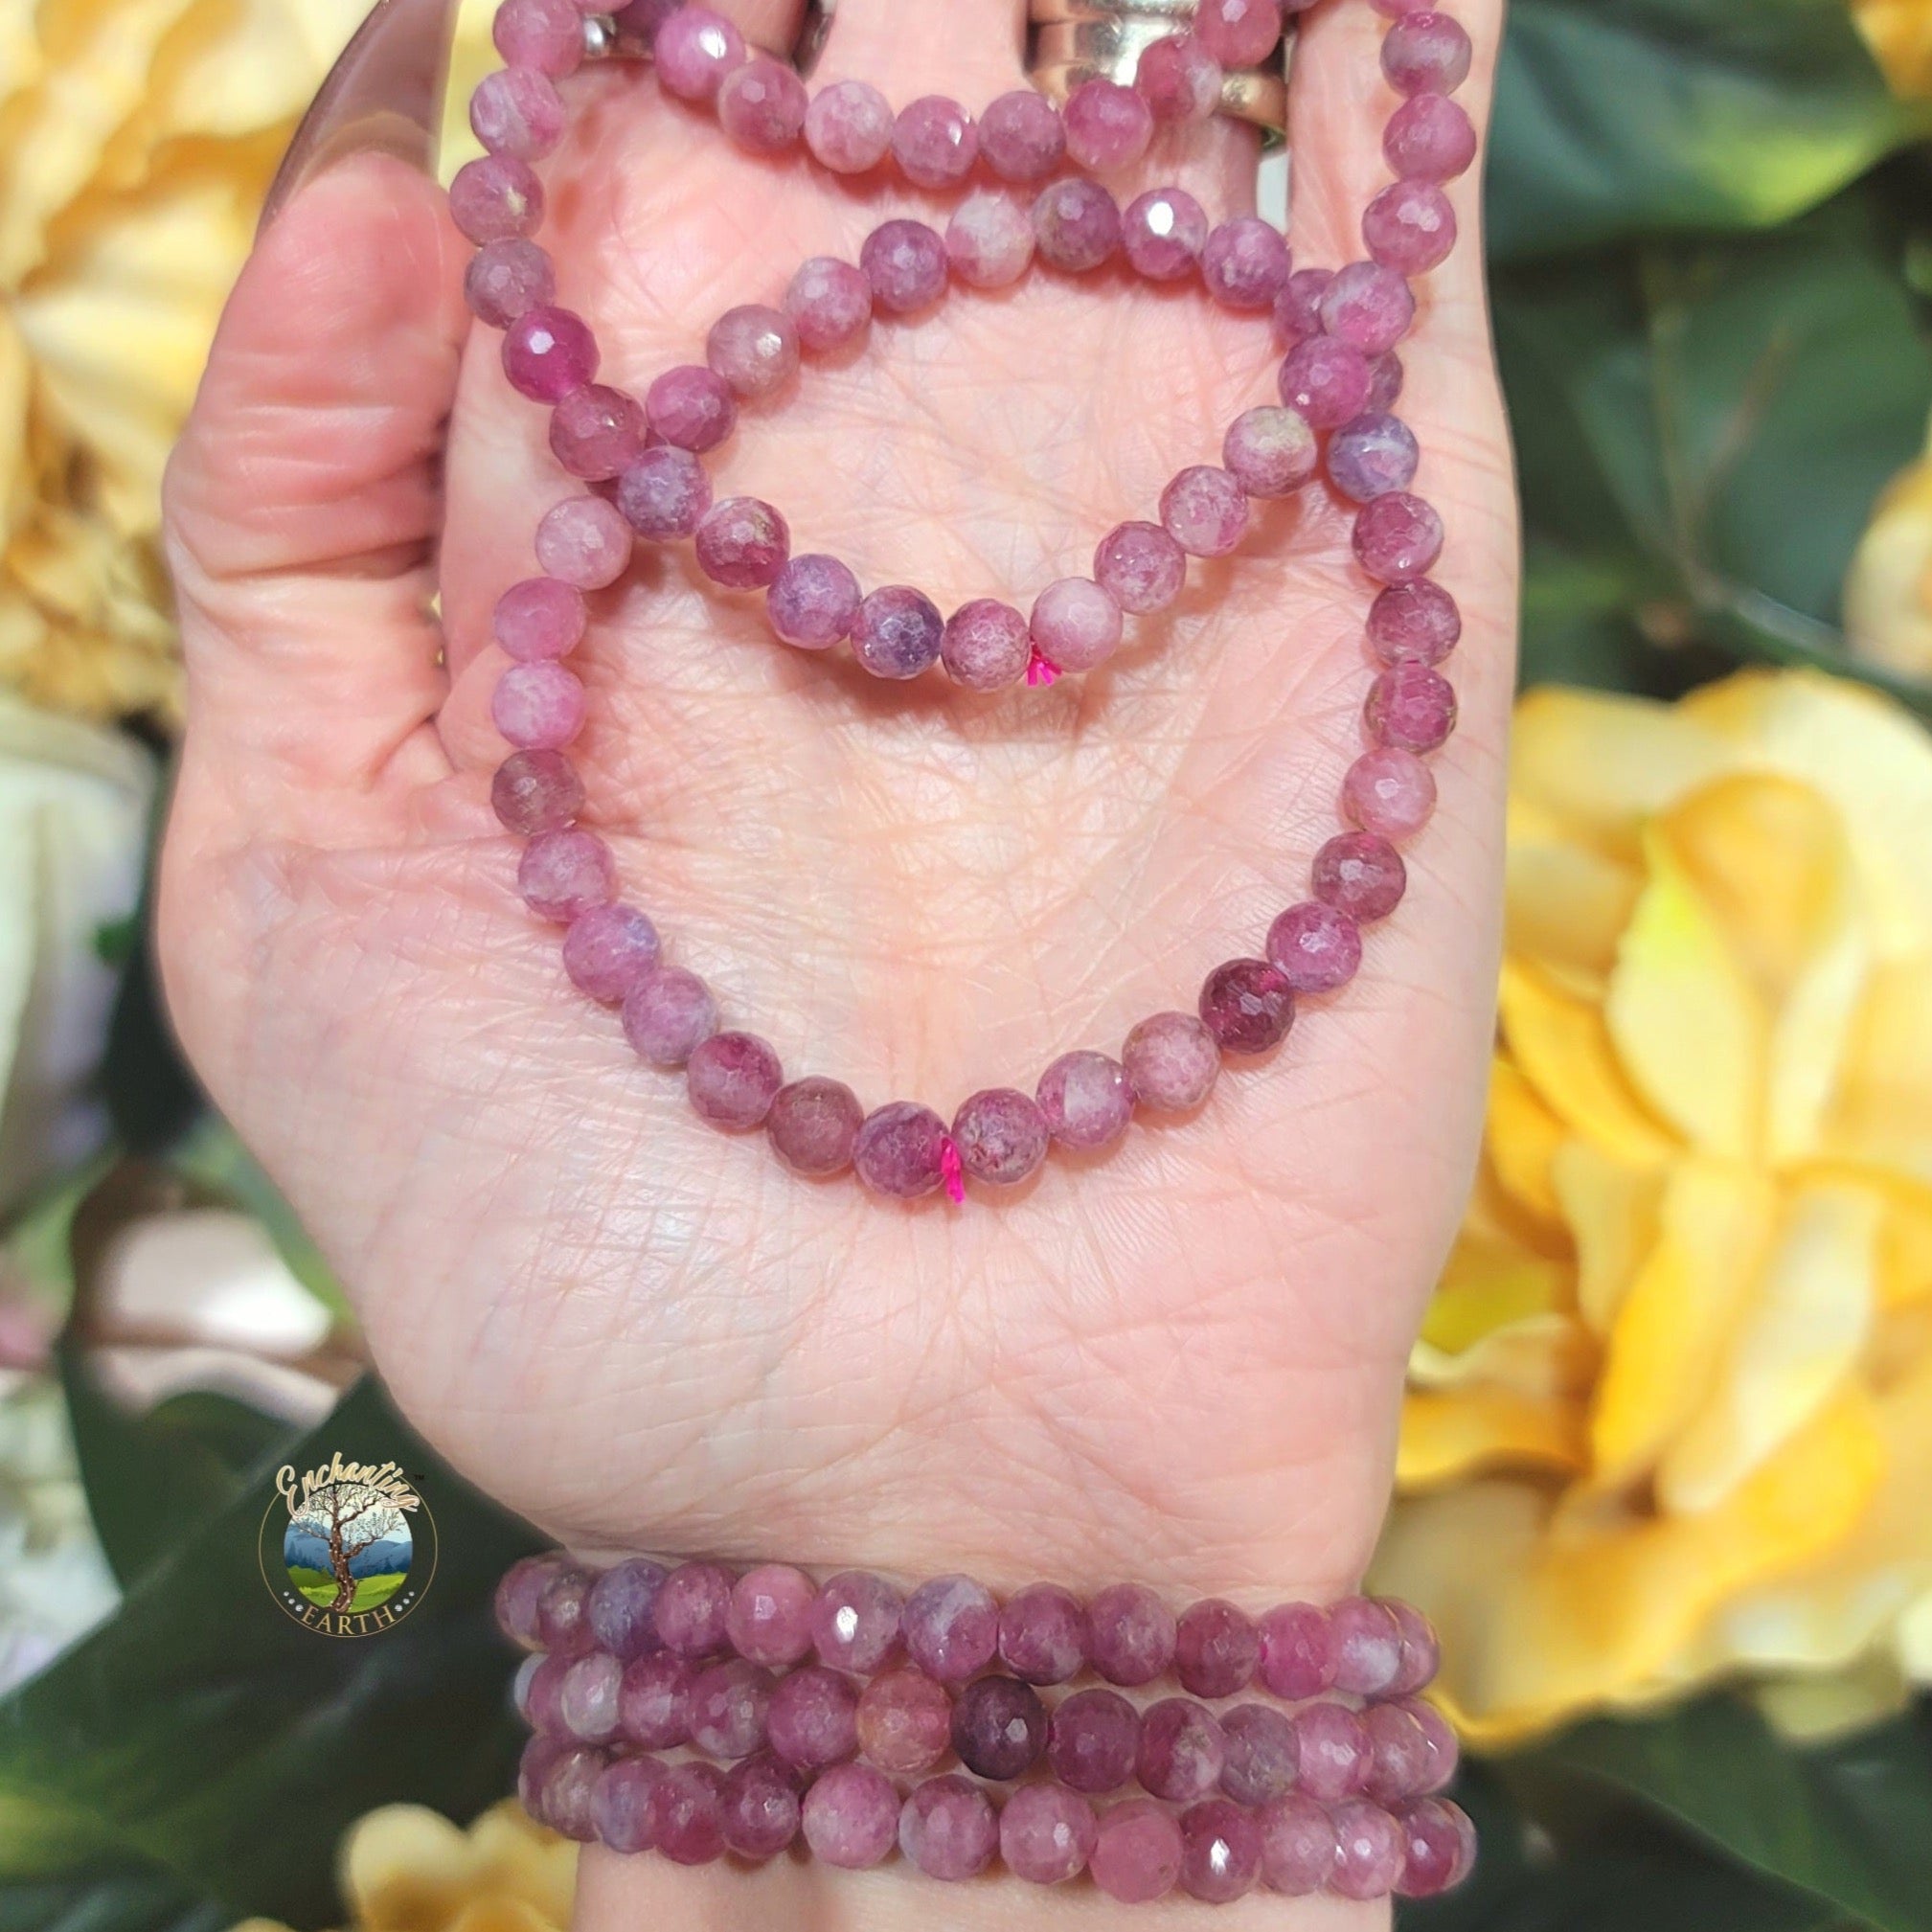 Pink Tourmaline Faceted Bracelet for Compassion, Joy, Opening Heart to Love & Wisdom